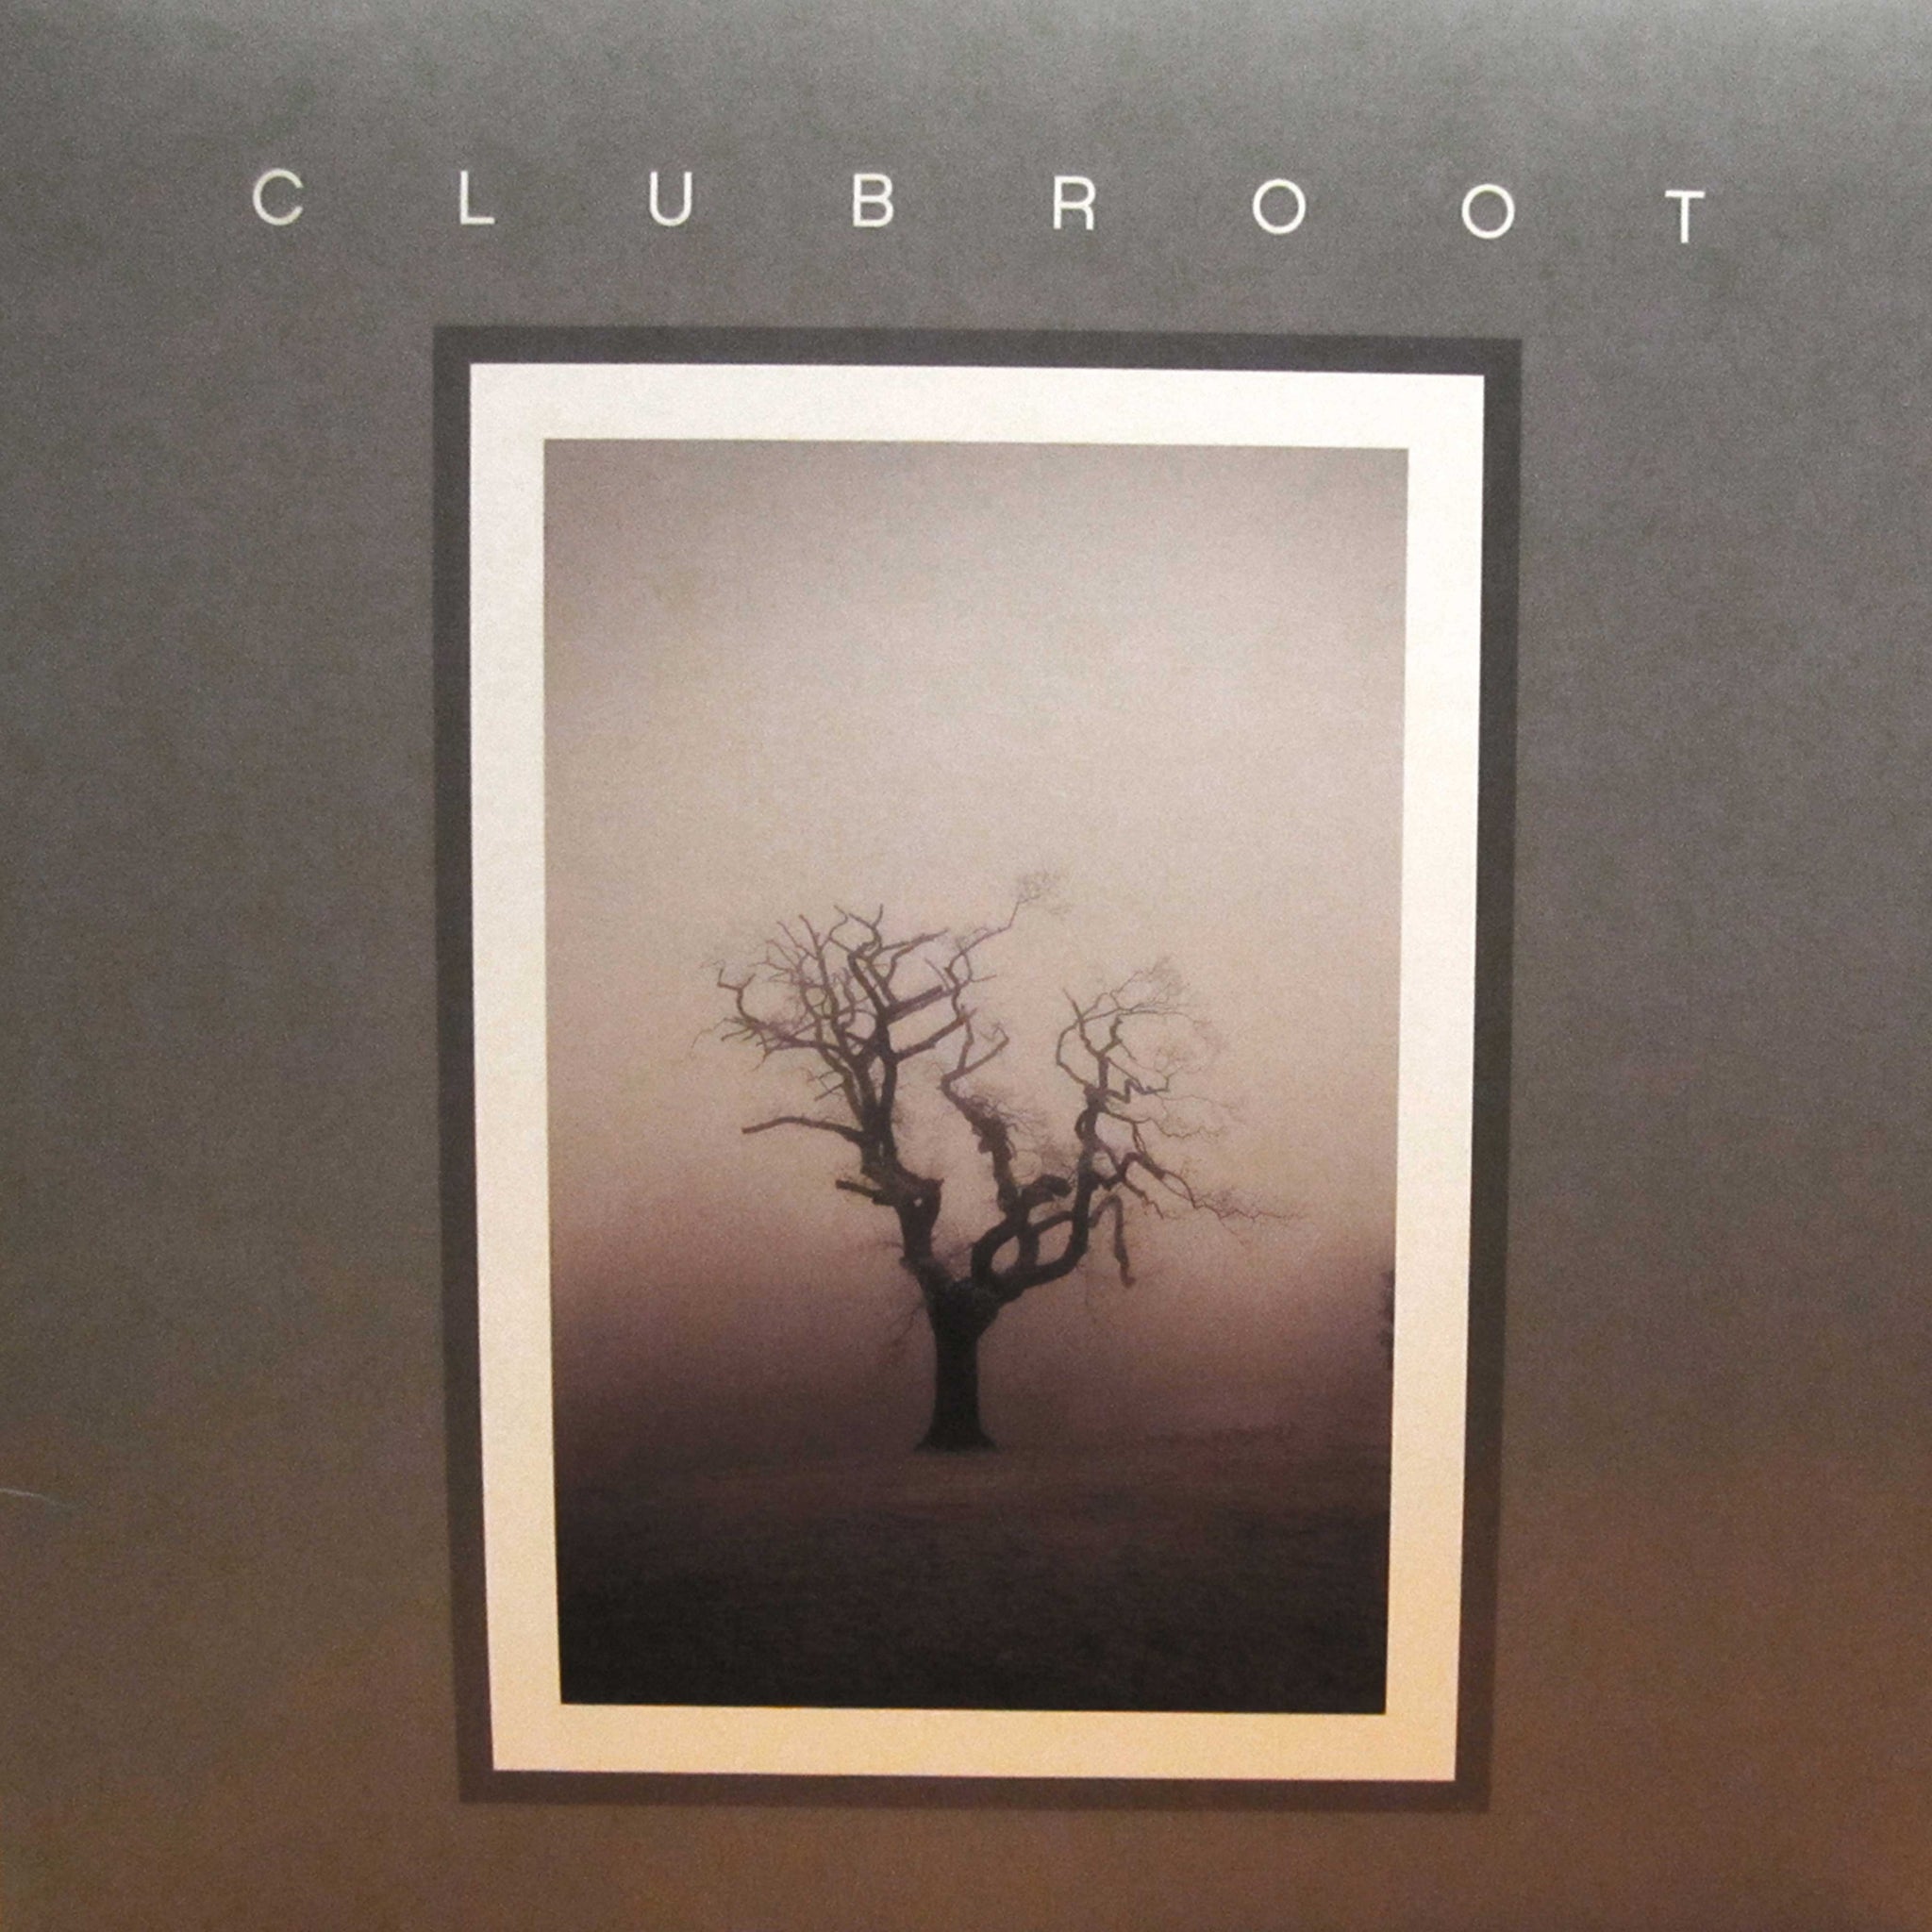 Clubroot - Clubroot I (2 x 12" LP) (Pre-order) - Out Of Joint Records